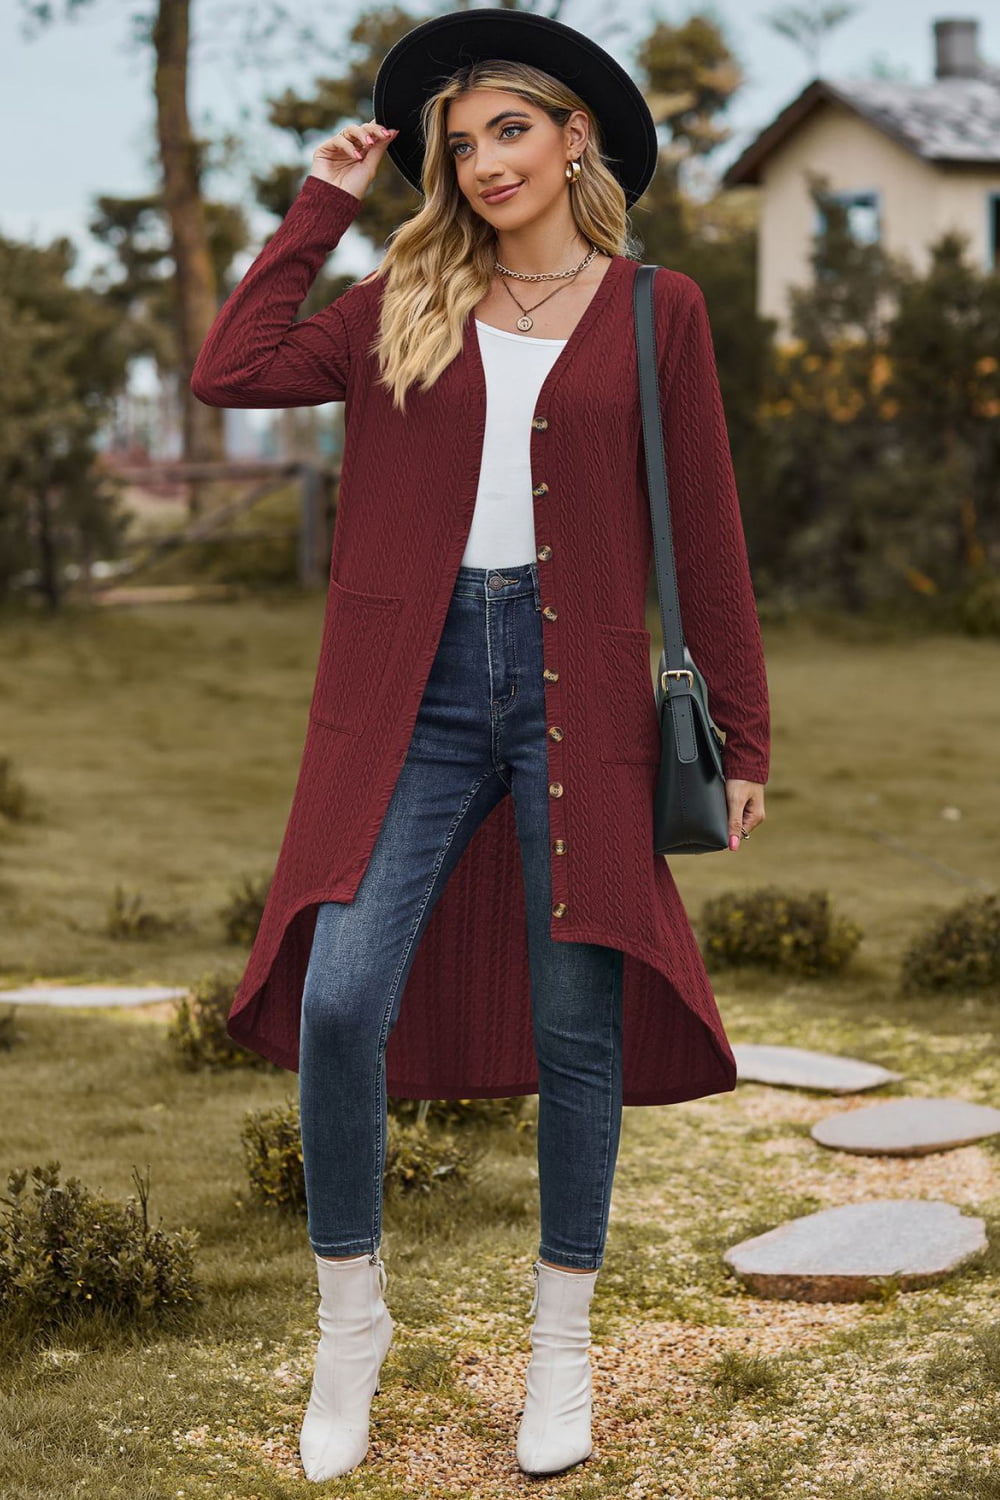 V-Neck Long Sleeve Cardigan with Pocket - Women’s Clothing & Accessories - Shirts & Tops - 6 - 2024